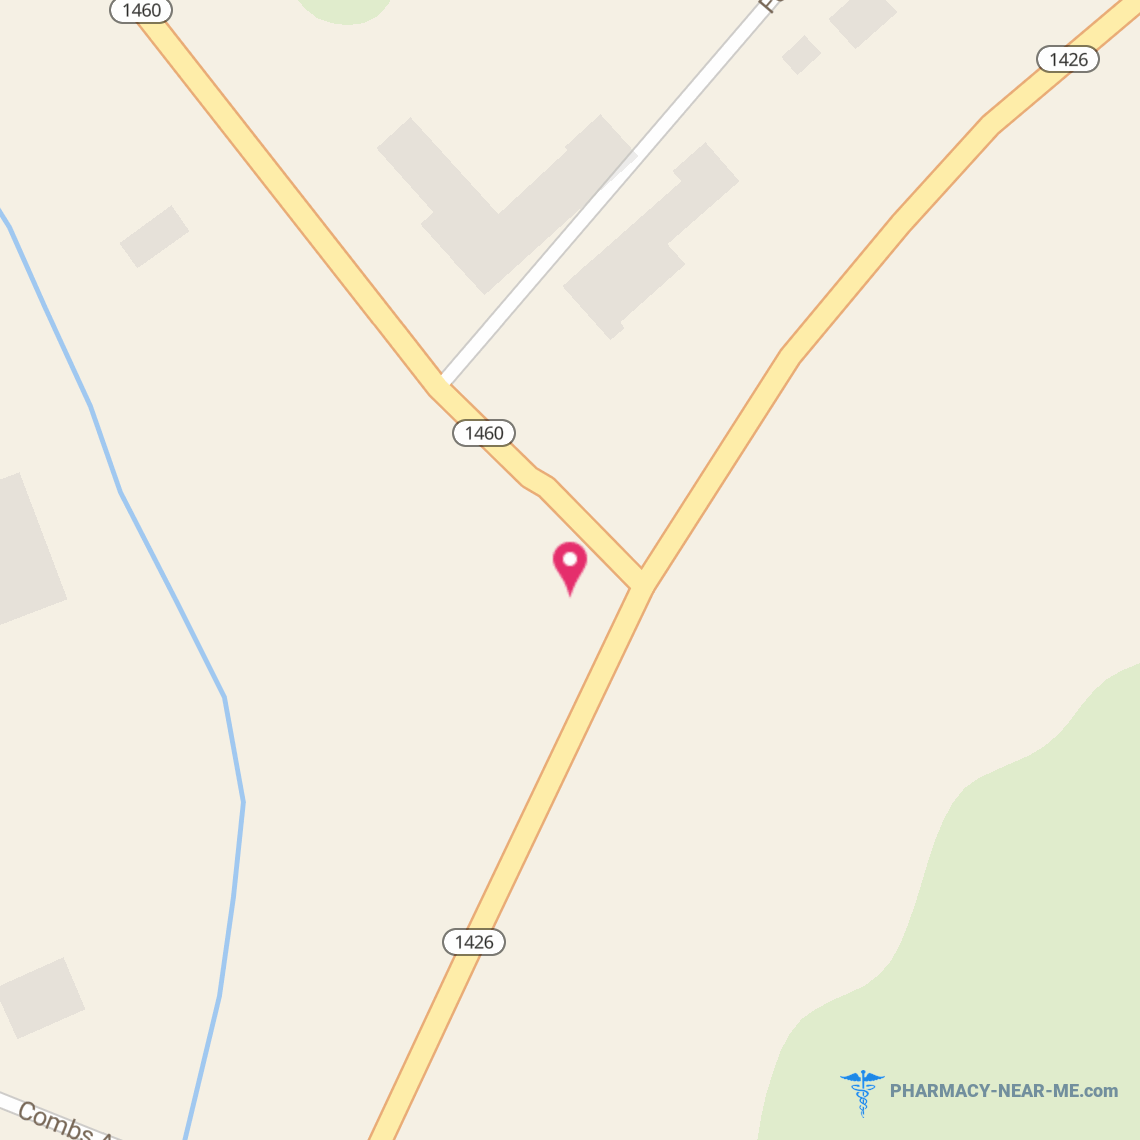 PIKEVILLE MEDICAL CENTER, INC. - Pharmacy Hours, Phone, Reviews & Information: 911 South Bypass Road, Pikeville, Kentucky 41501, United States